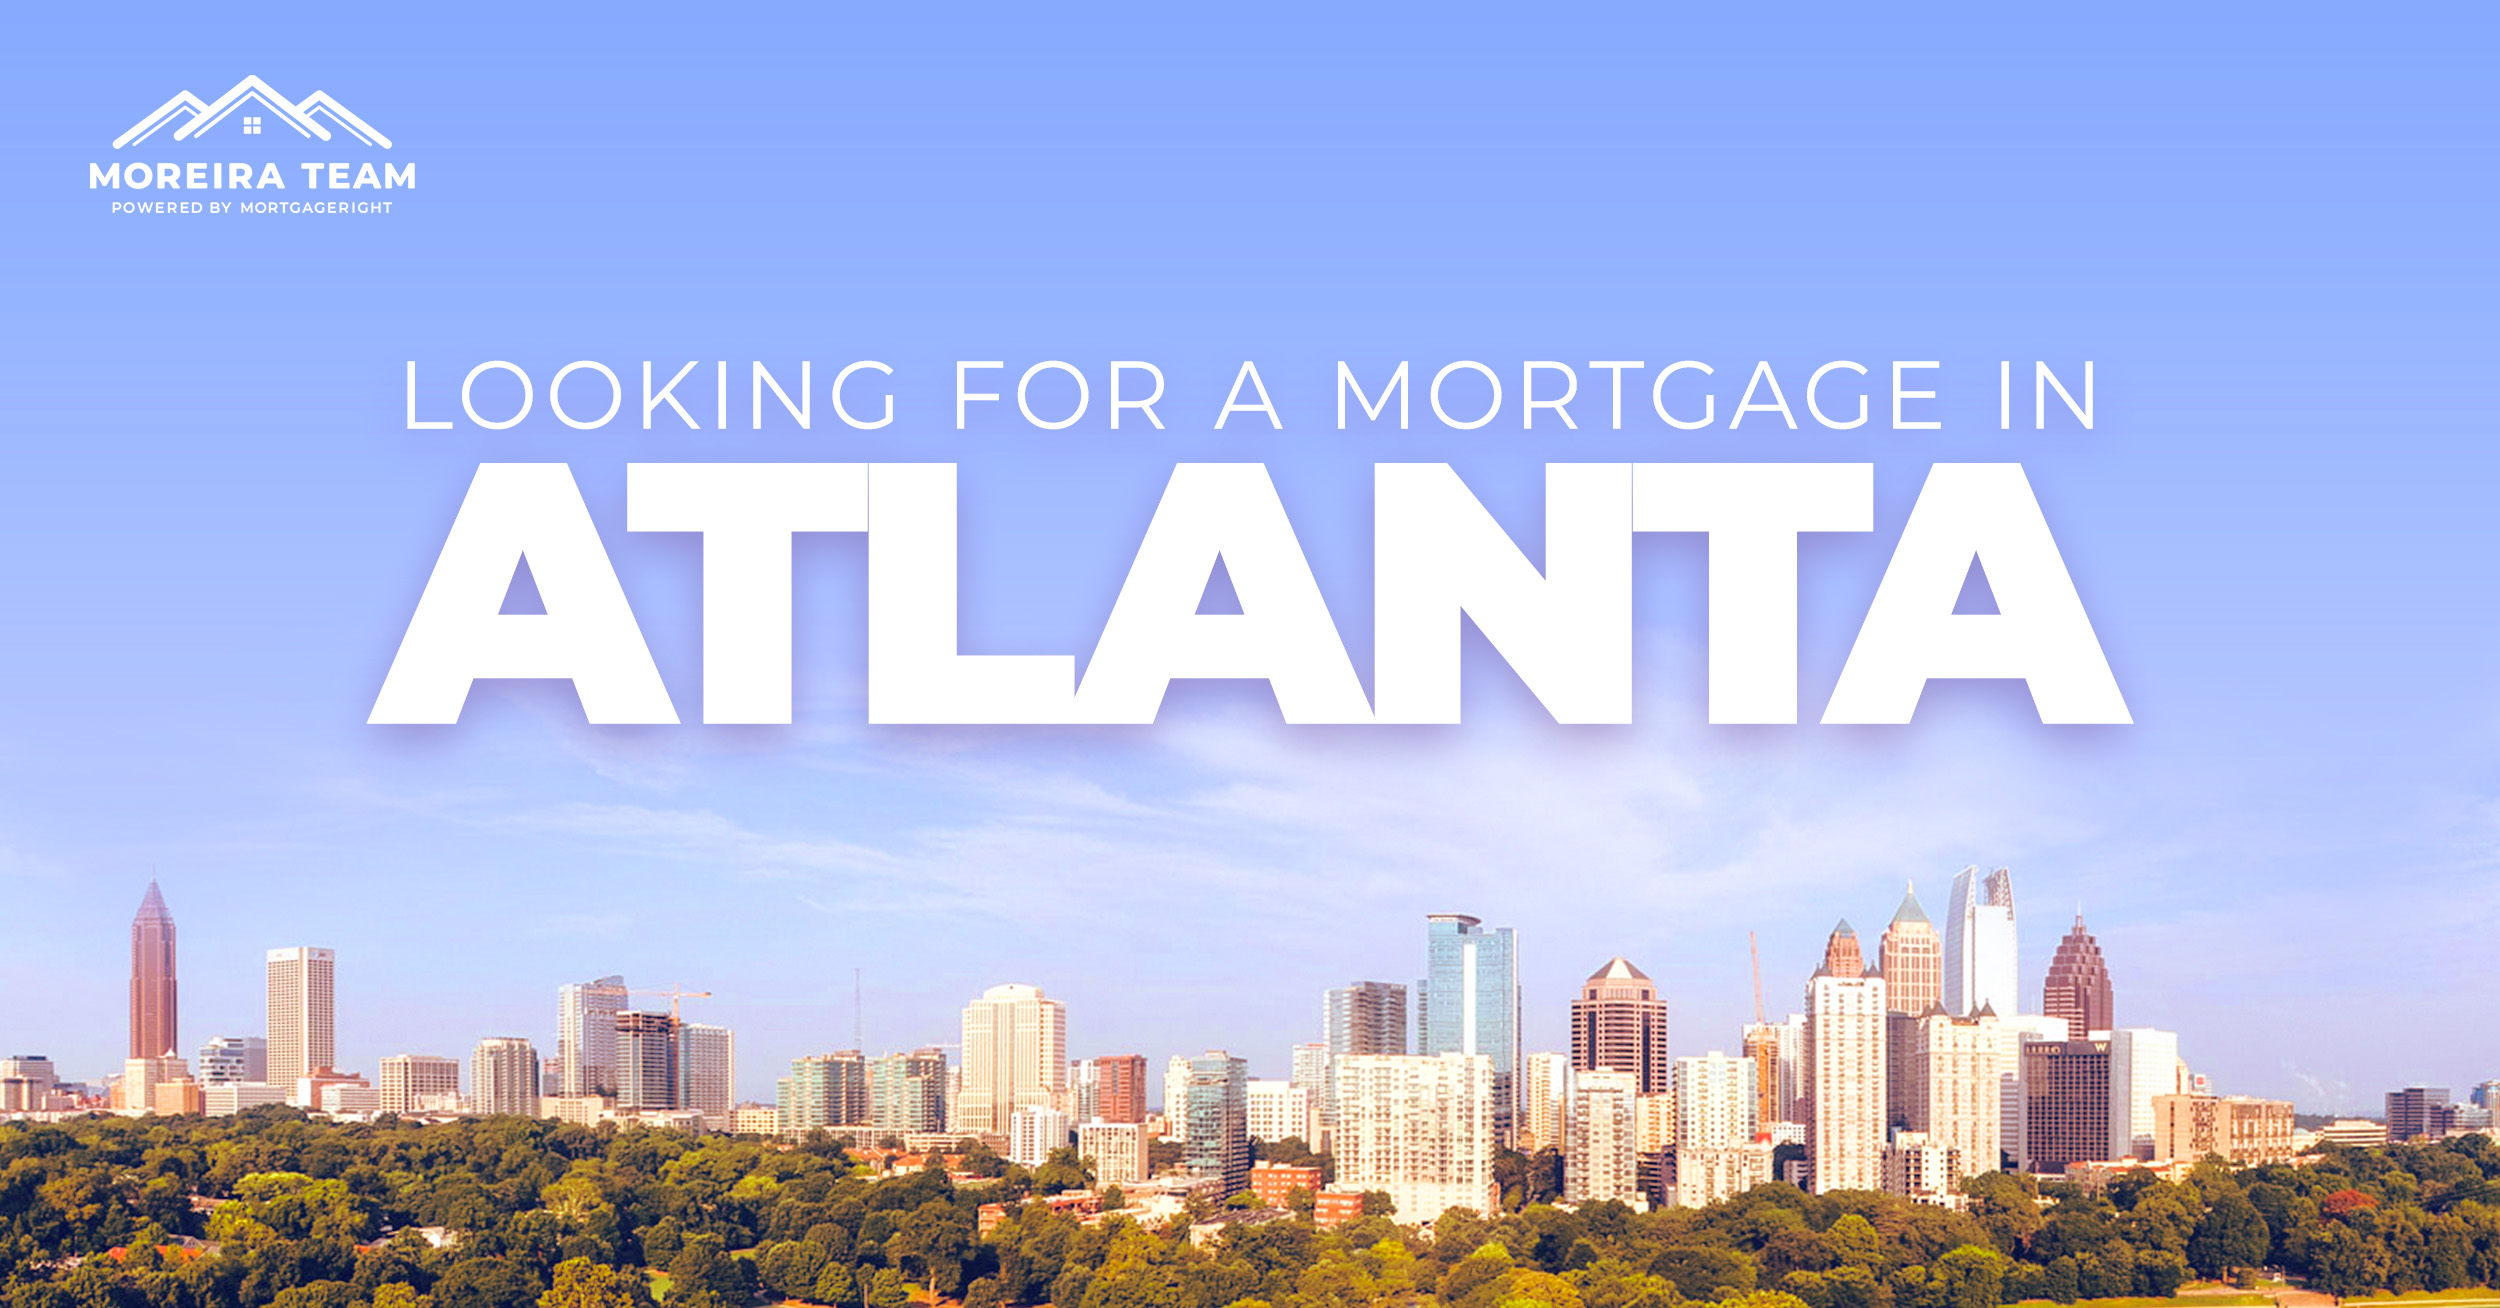 Find the Best Mortgage Brokers in Atlanta – Compare Rates & 5* Reviews